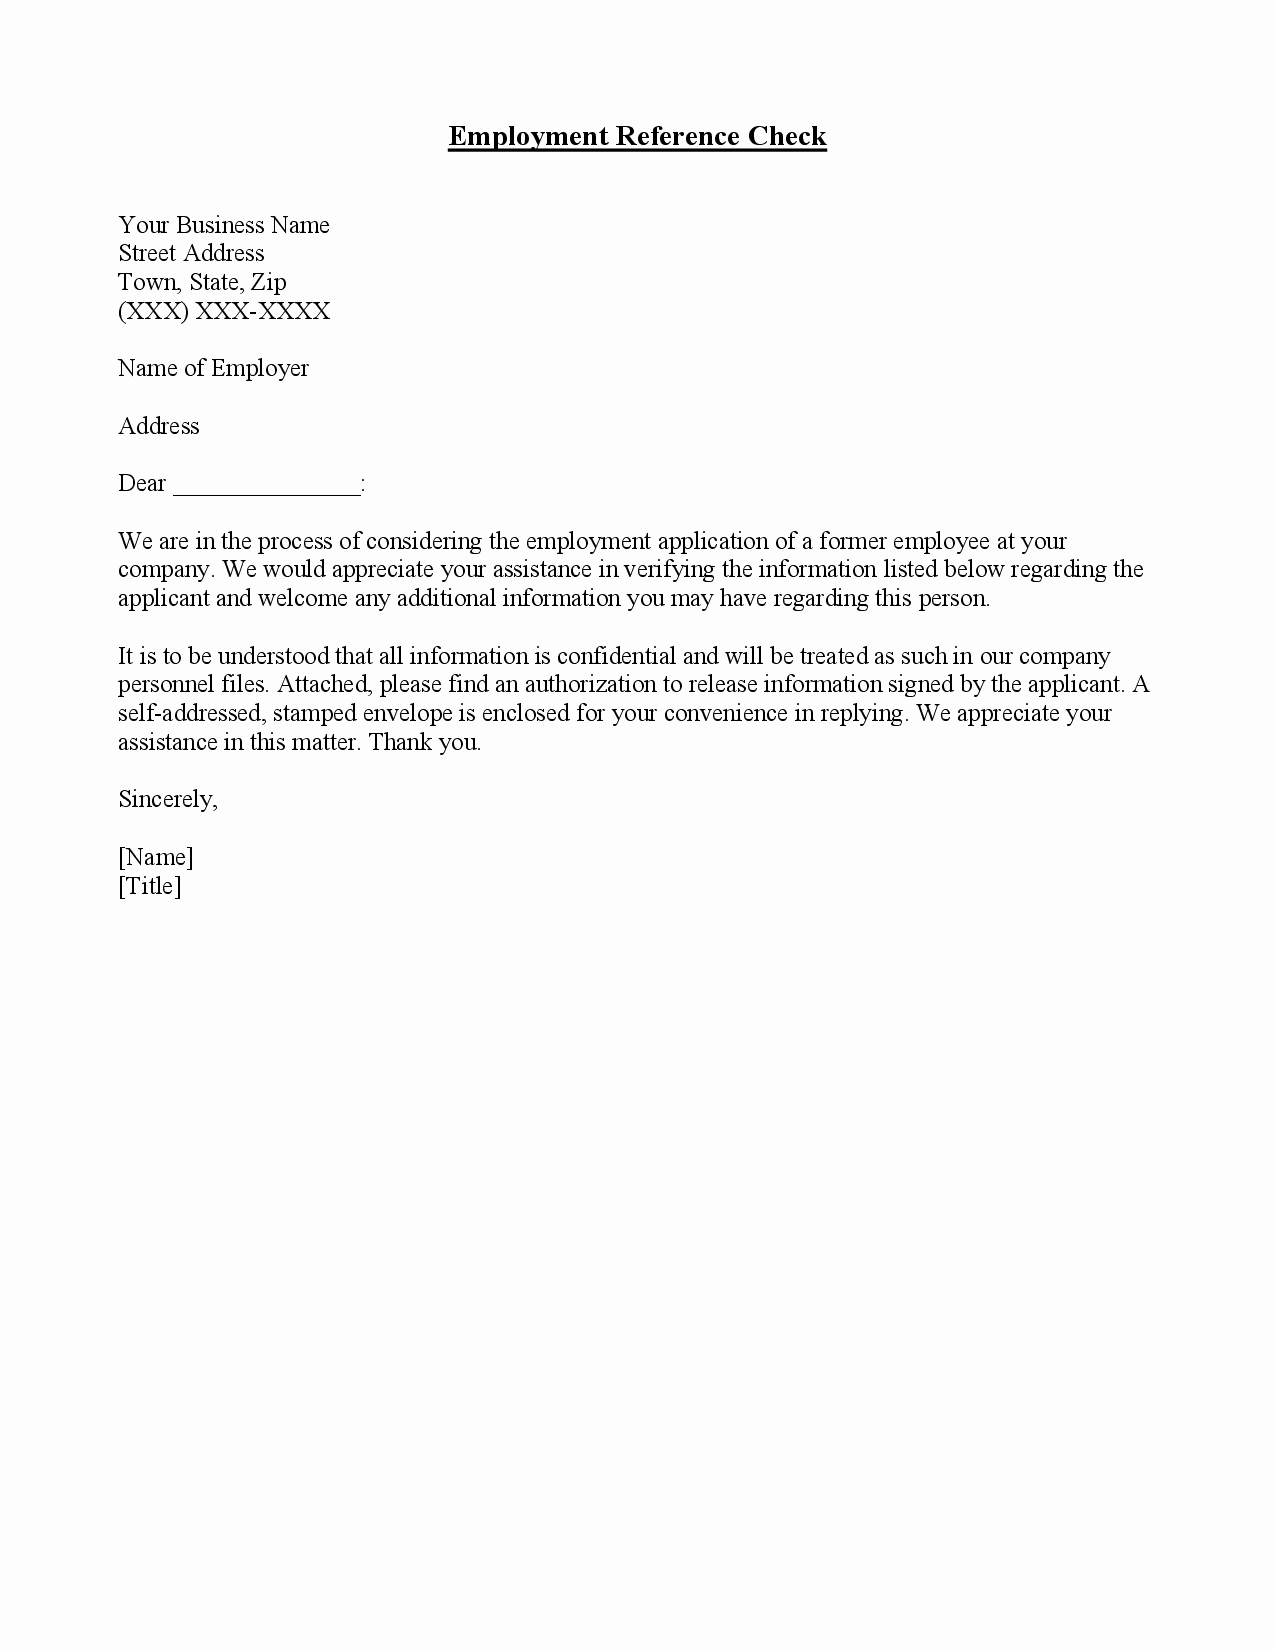 Letter Of Recommendation Employment Template Unique Best S Of Employment Reference Letter Job Application